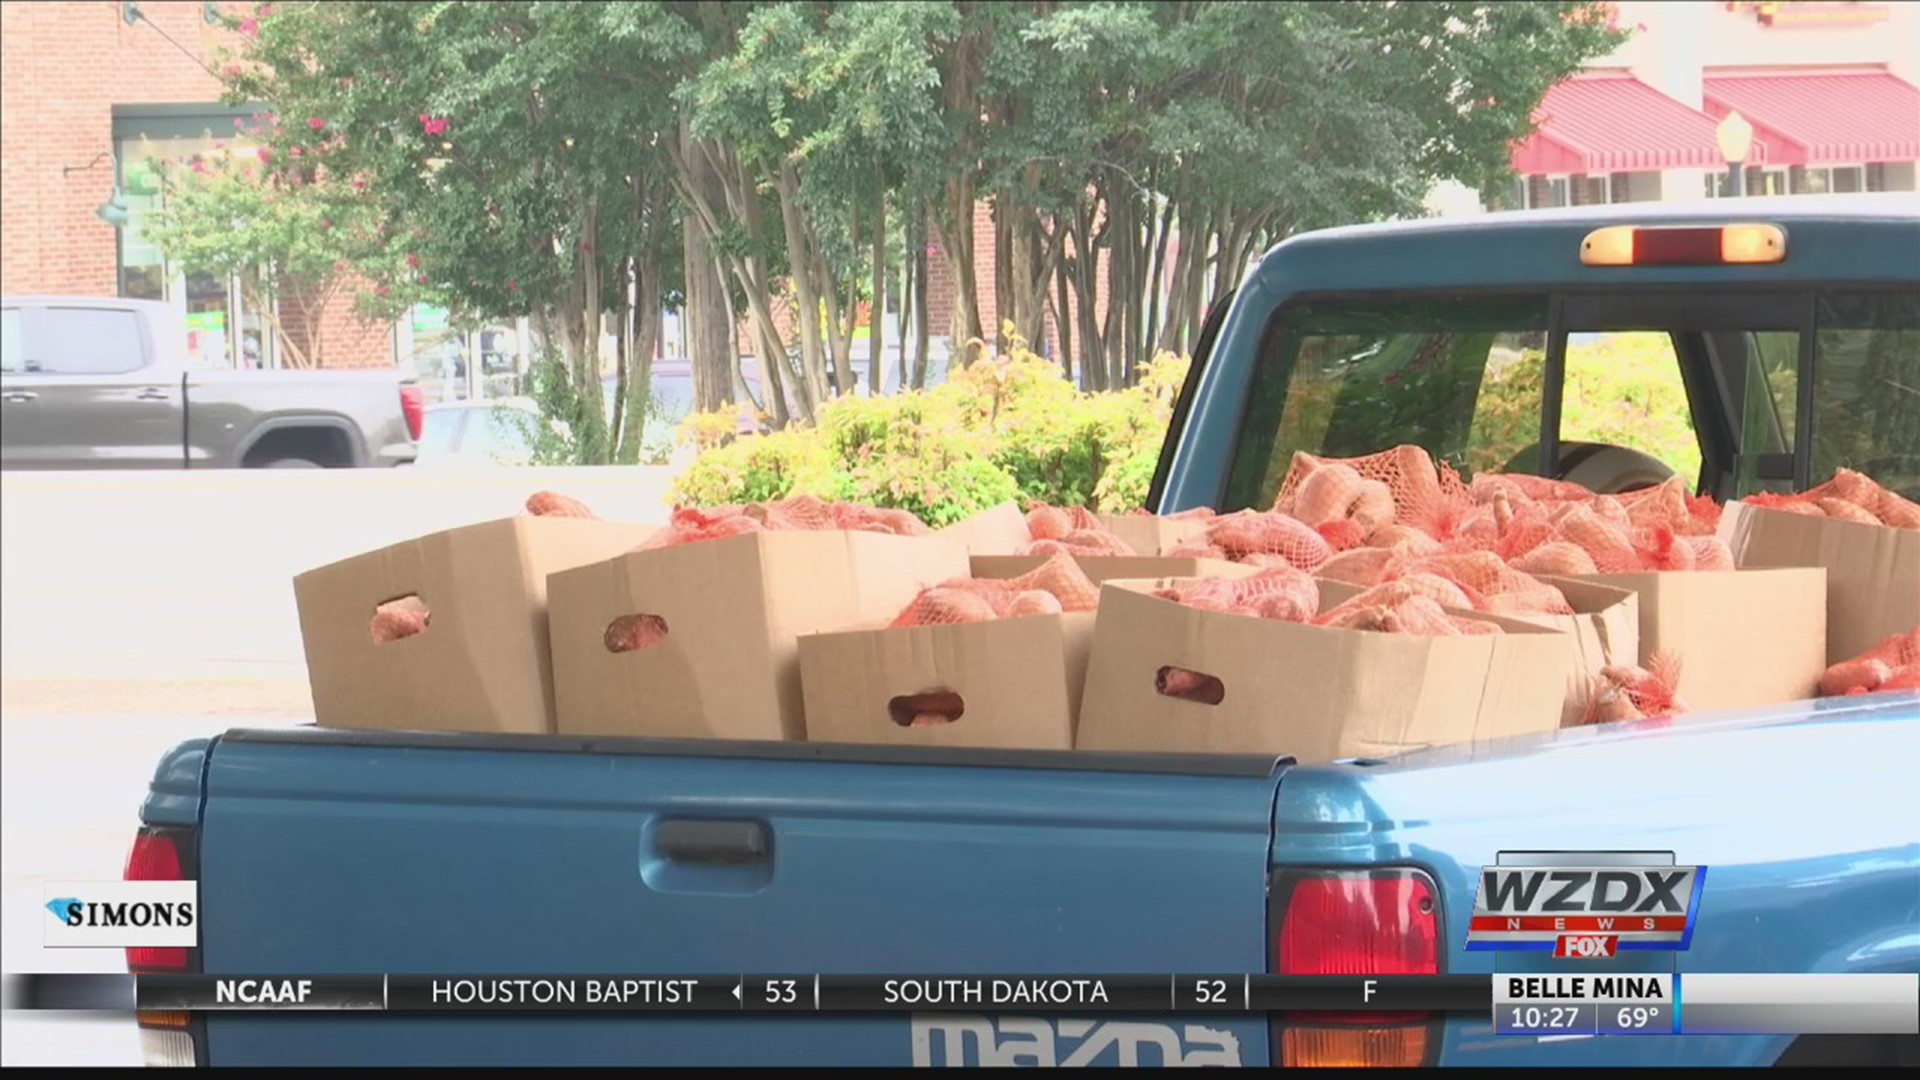 Local farms are giving away sweet potatoes to those in need.